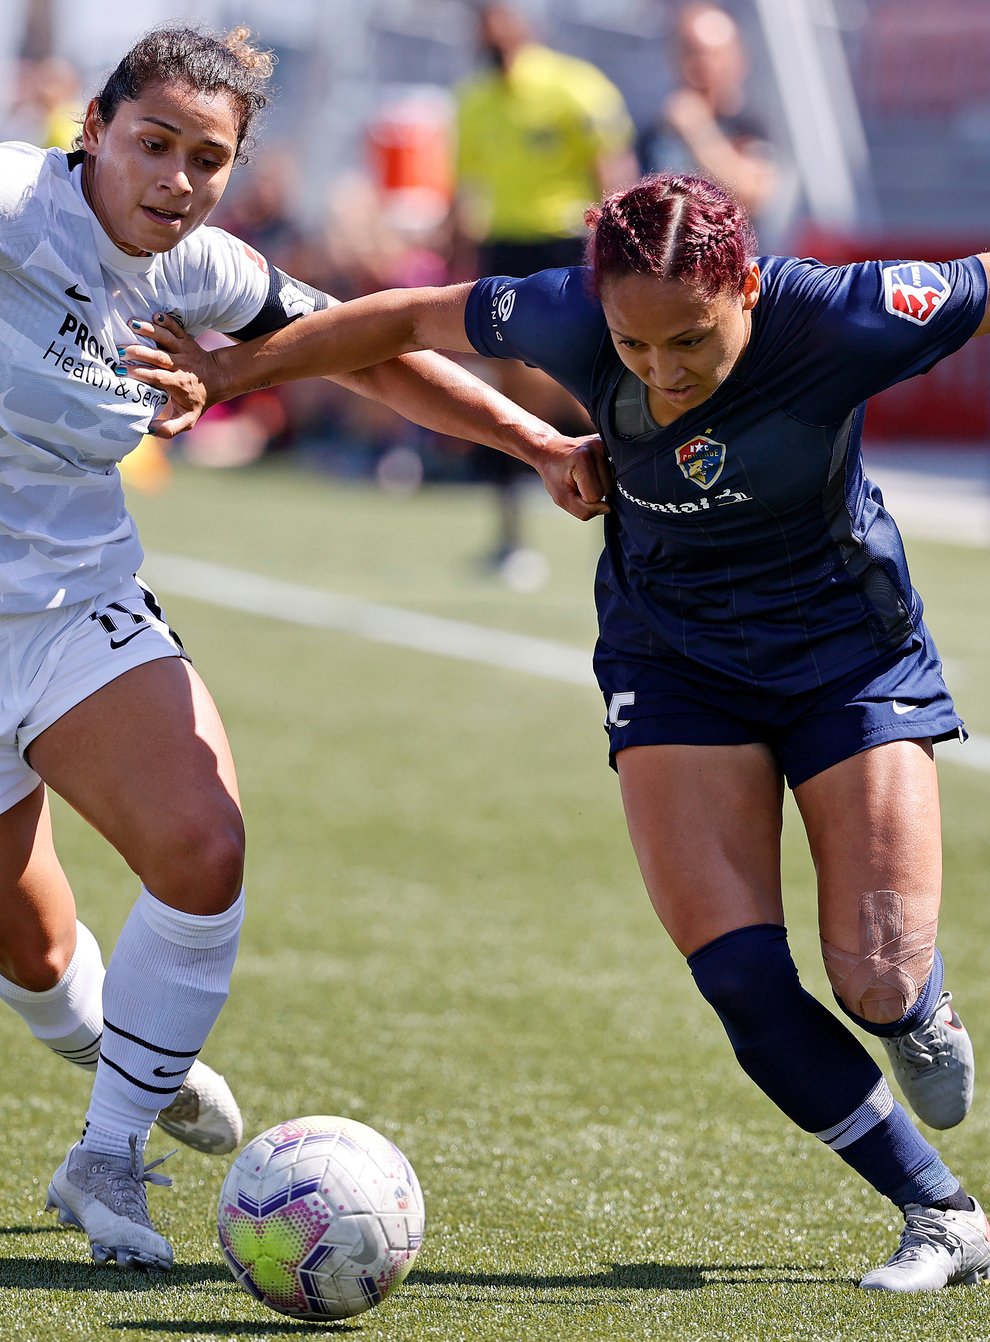 Thorns have knocked out Courage in the NWSL Challenge Cup